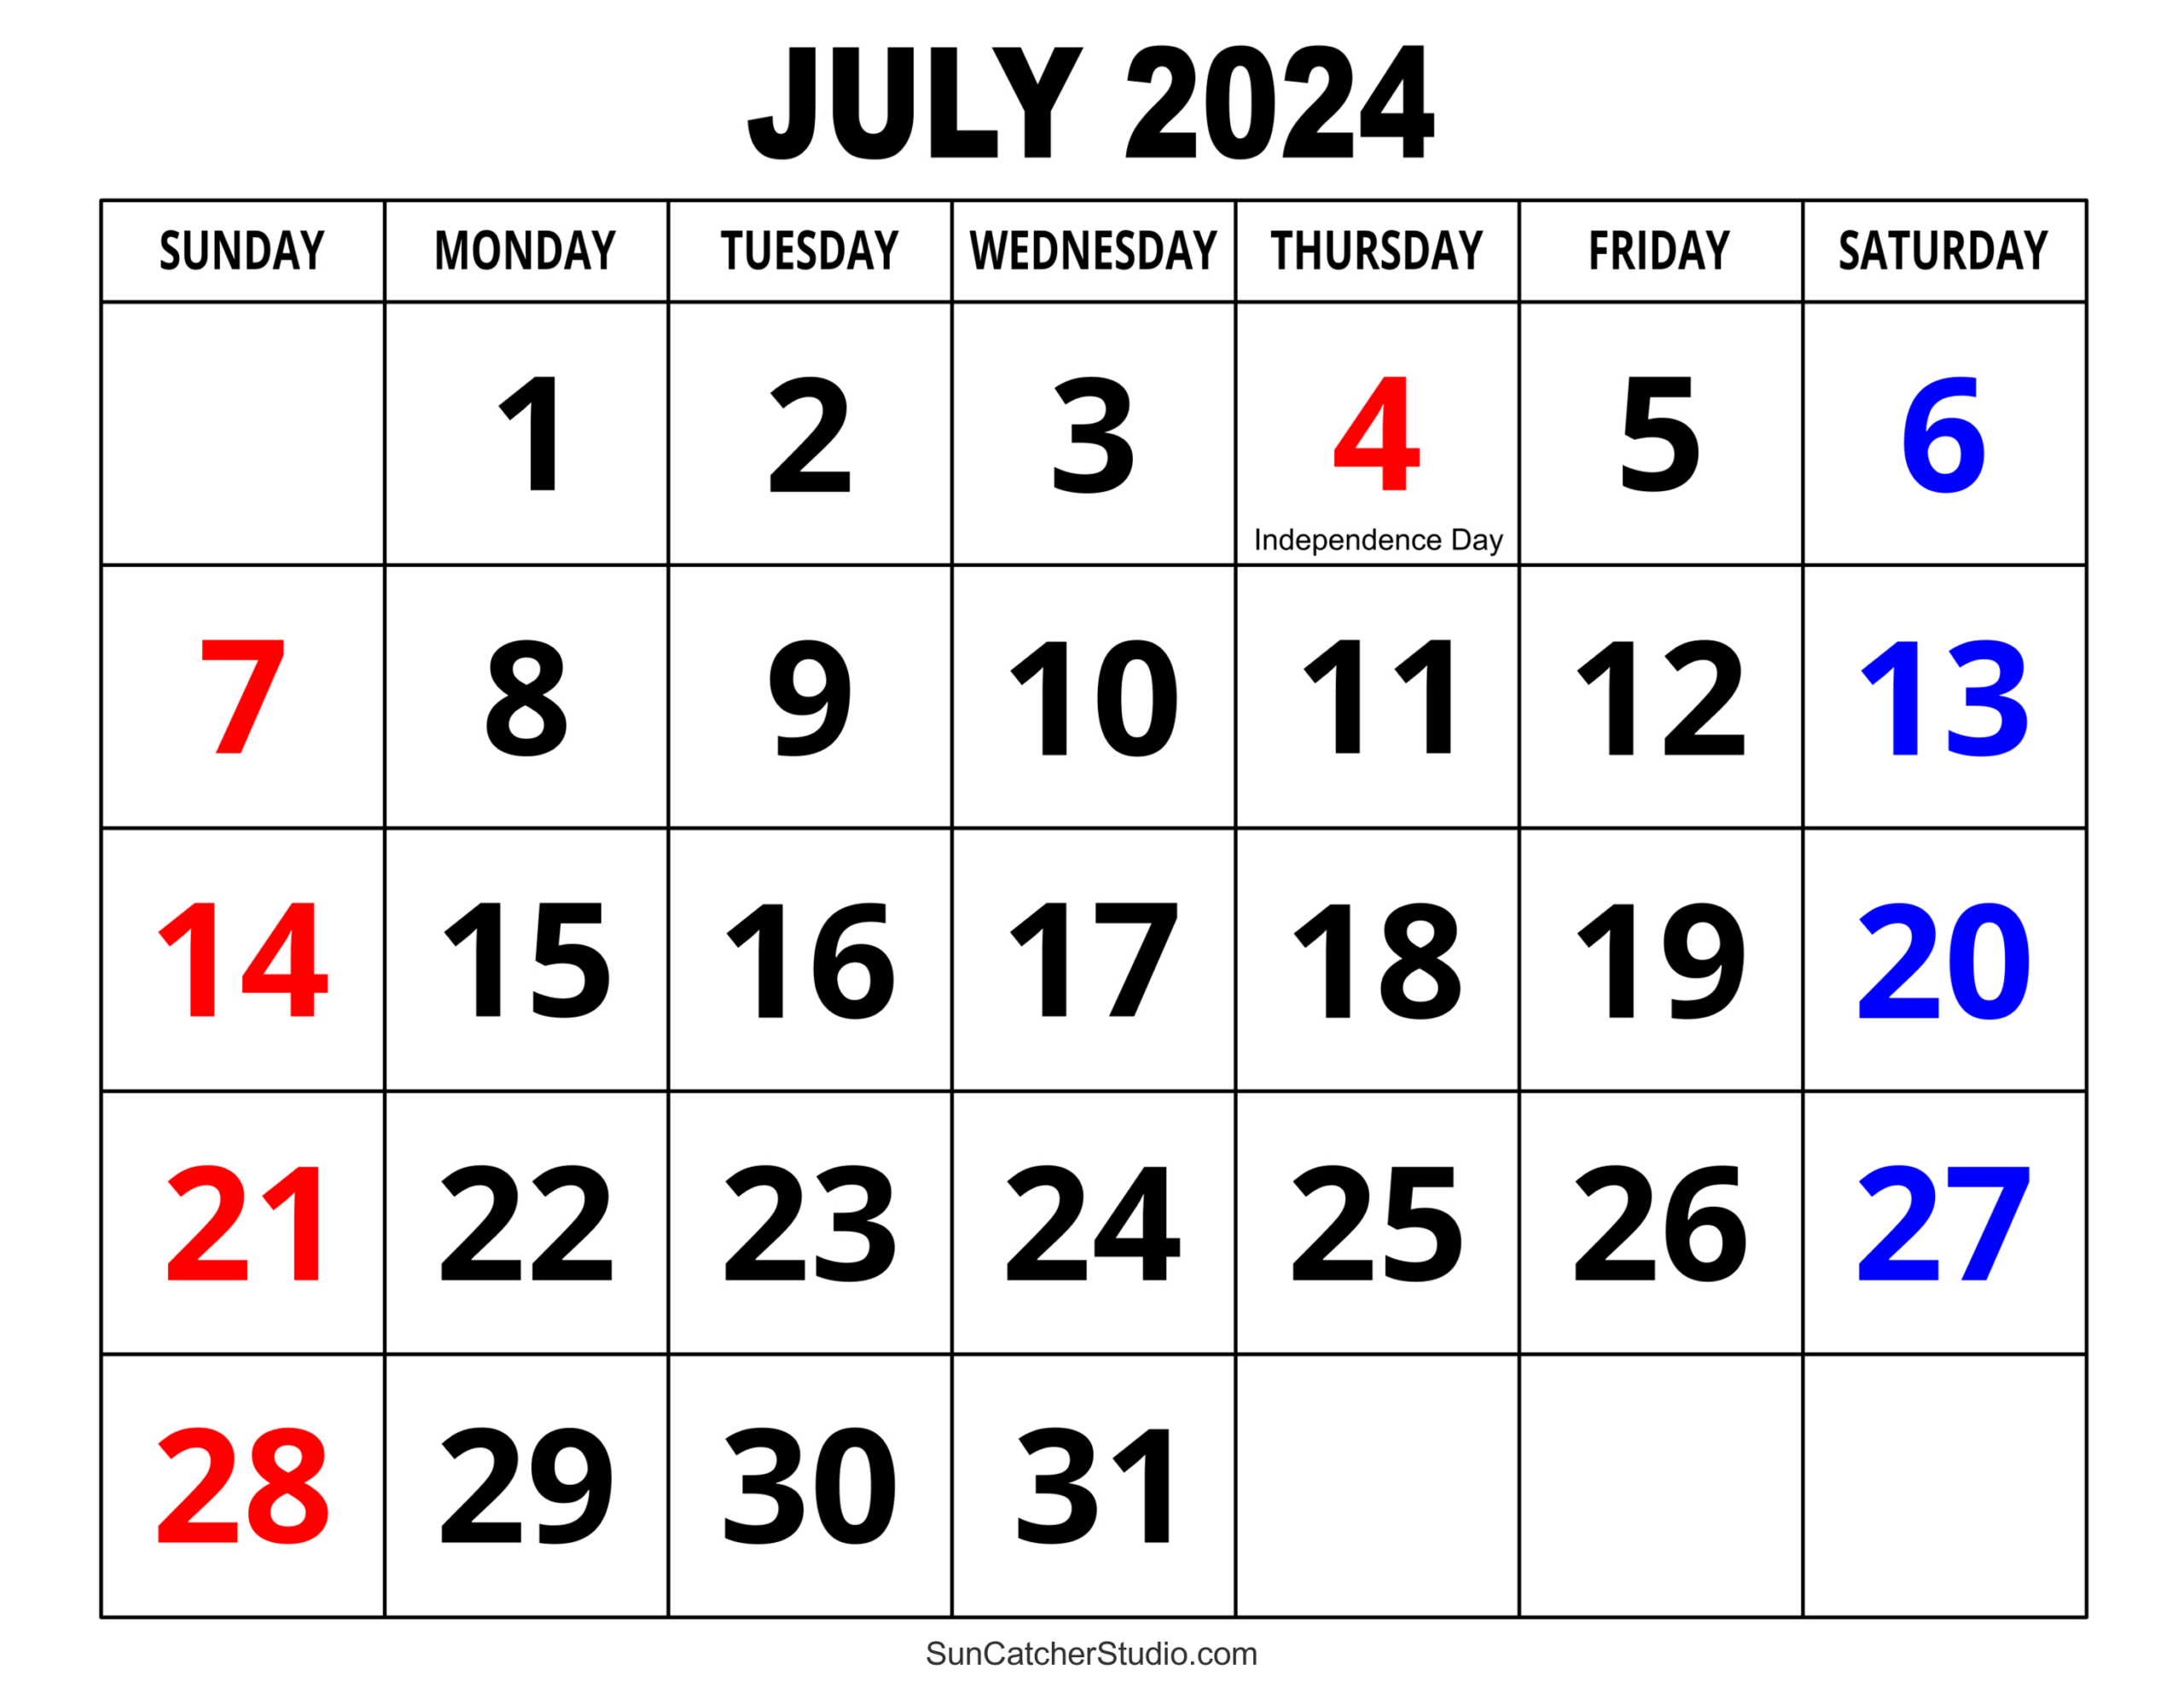 July 2024 Calendar (Free Printable) – Diy Projects, Patterns | 27 July 2024 Calendar Printable